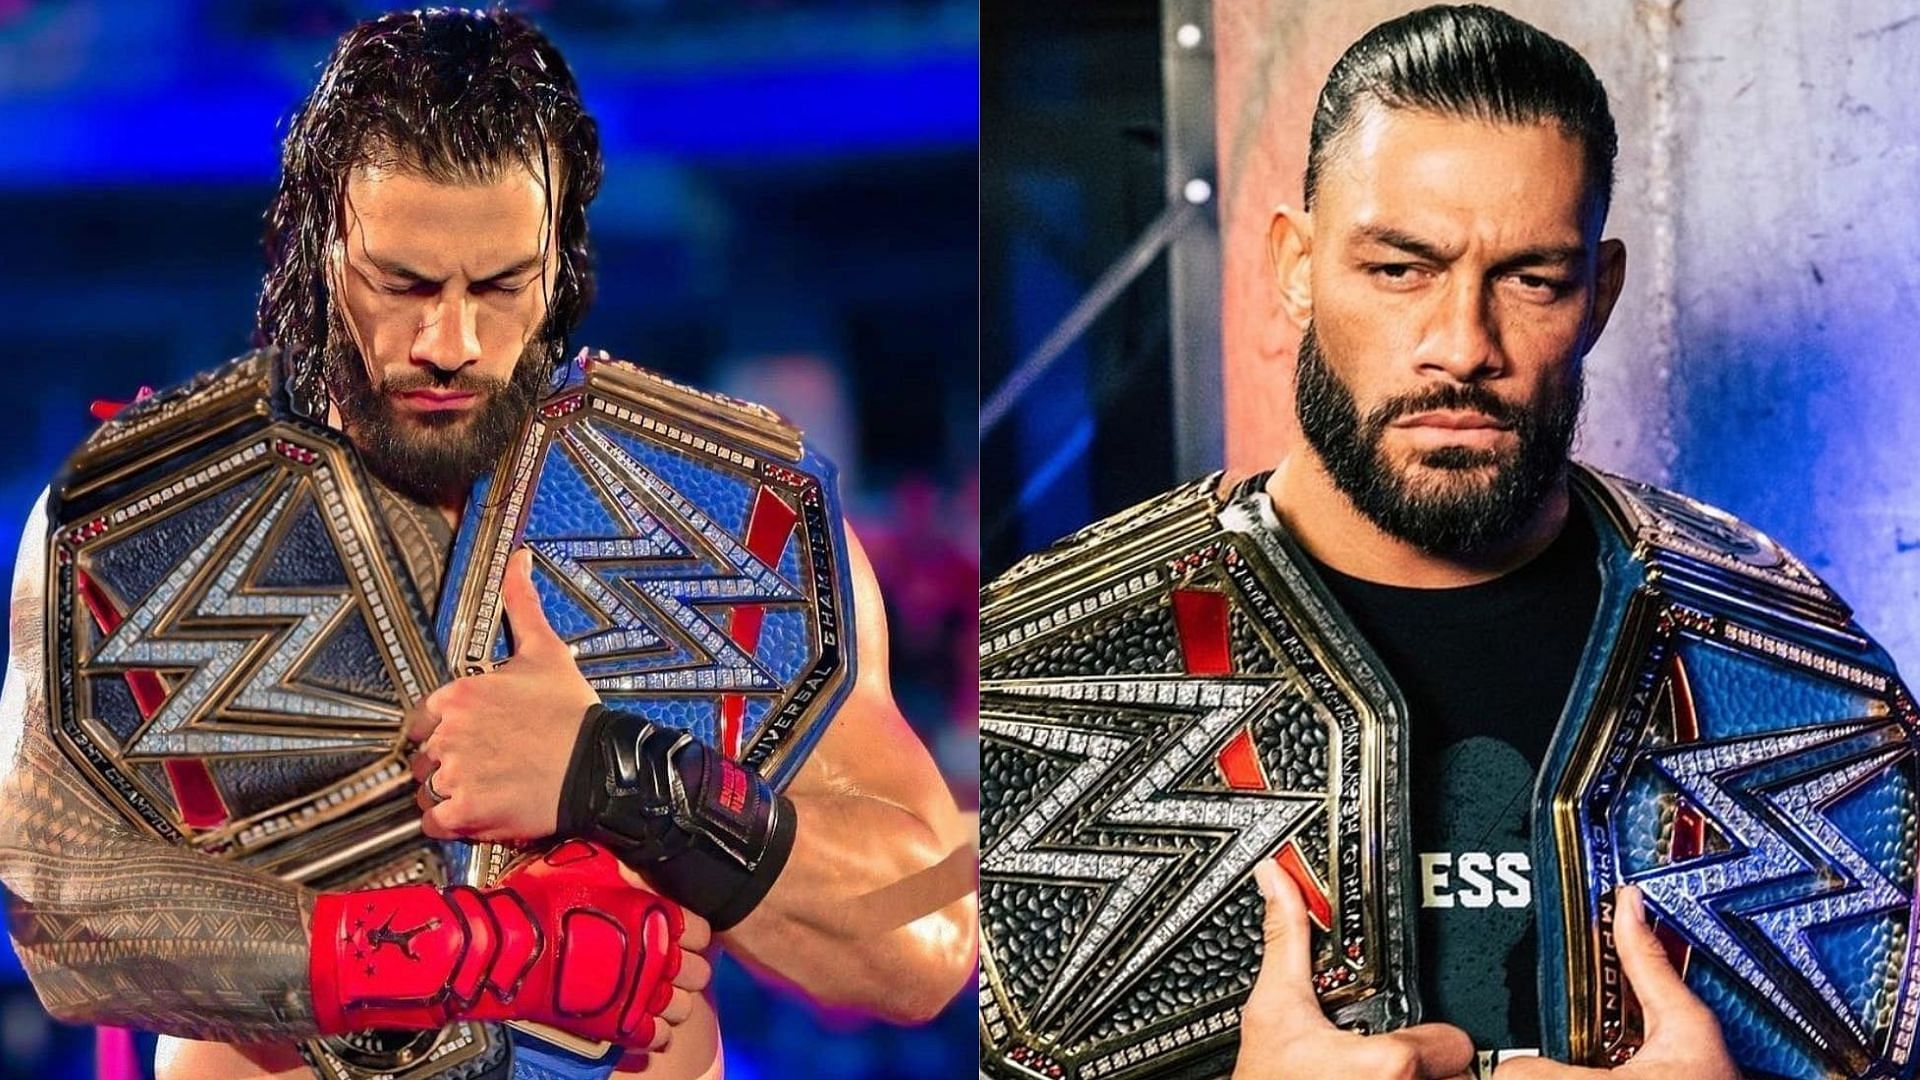 Roman Reigns is currently the Undisputed WWE Universal Champion.